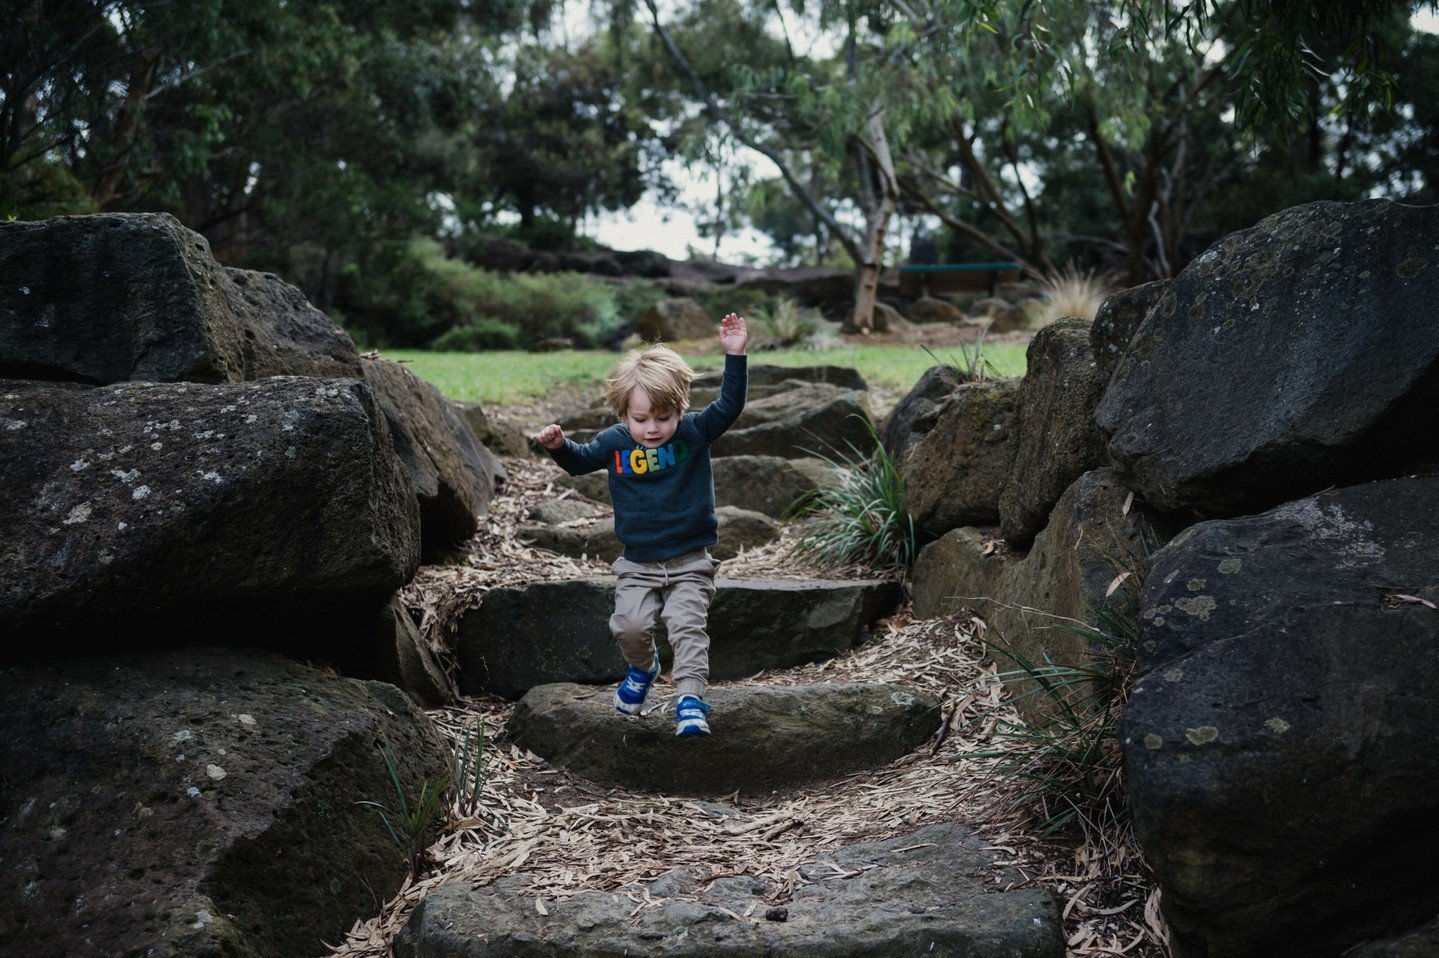 Exploring, jumping, climbing - your kids will have lots to do at my photo sessions! And they'll burn enough energy to have a chilled afternoon or an easy bedtime afterwards.... 😉

#melbournefamilyphotographer #capturingchildhood #melbournefamilyphot